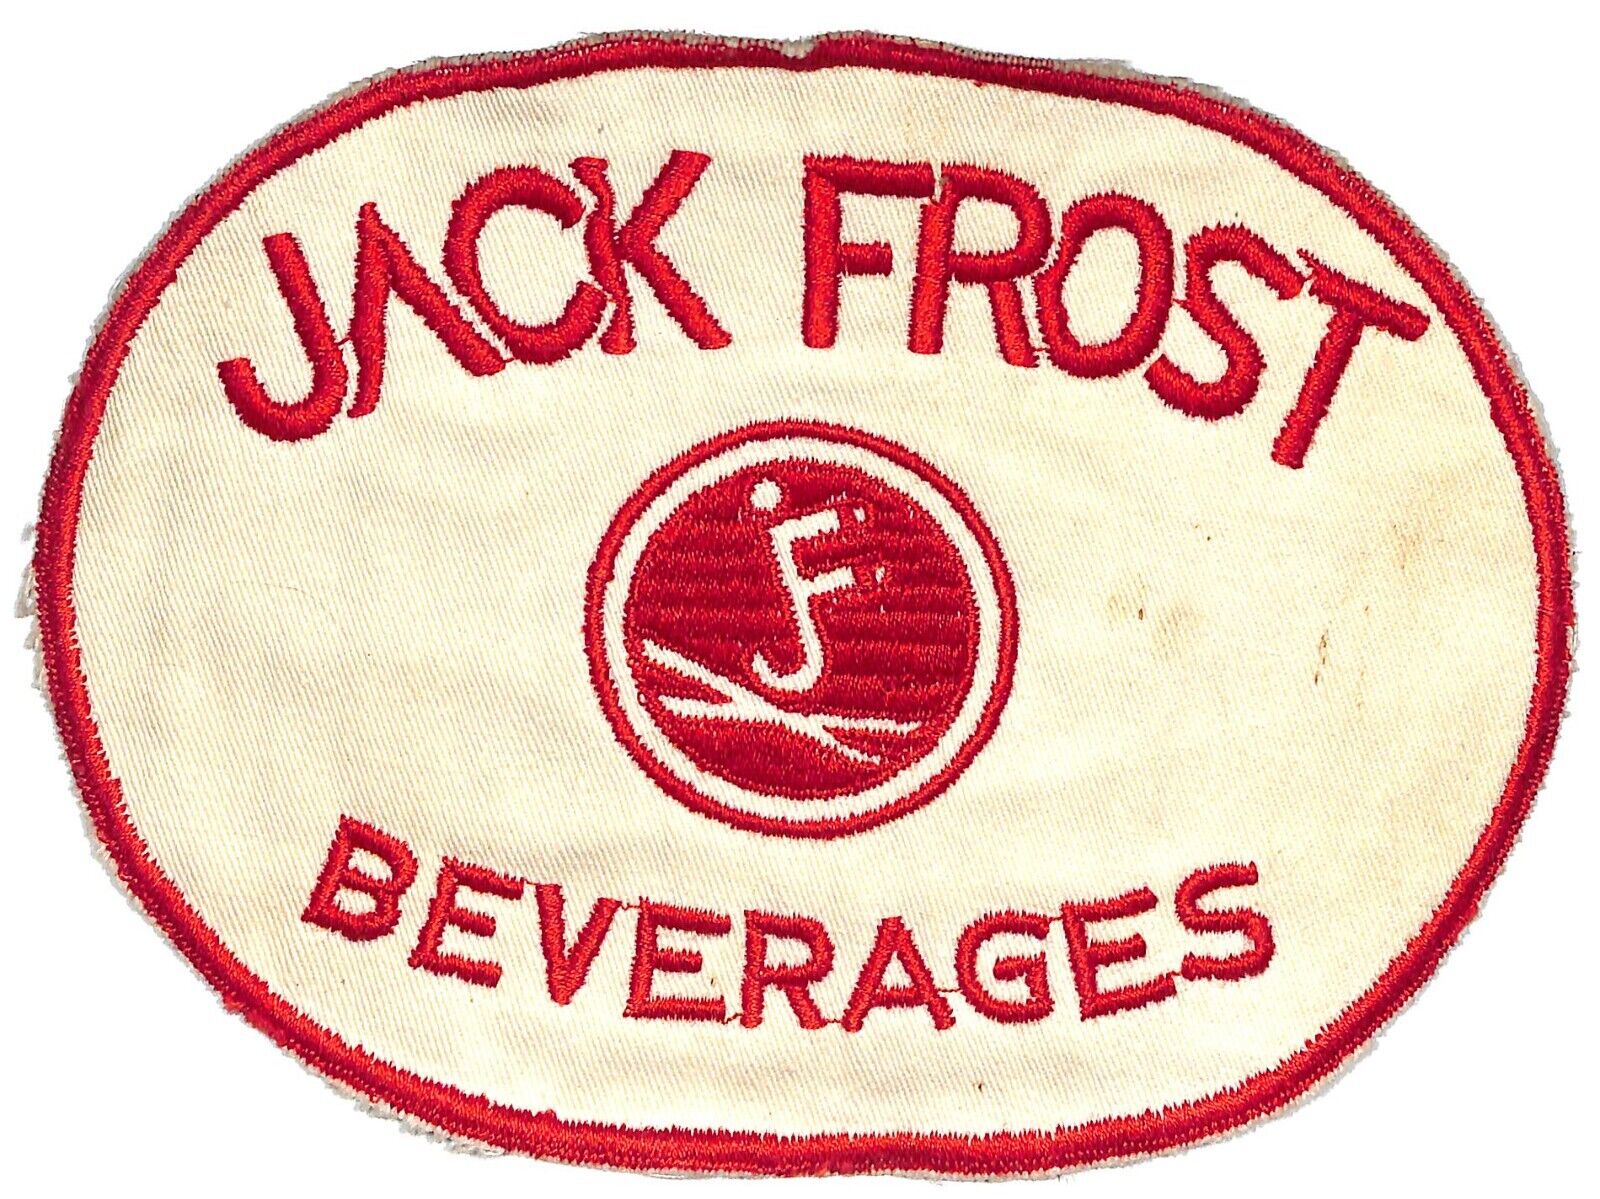 Jack Frost Beverages Embroidered Soda Patch c1940's-50's VGC Very Scarce